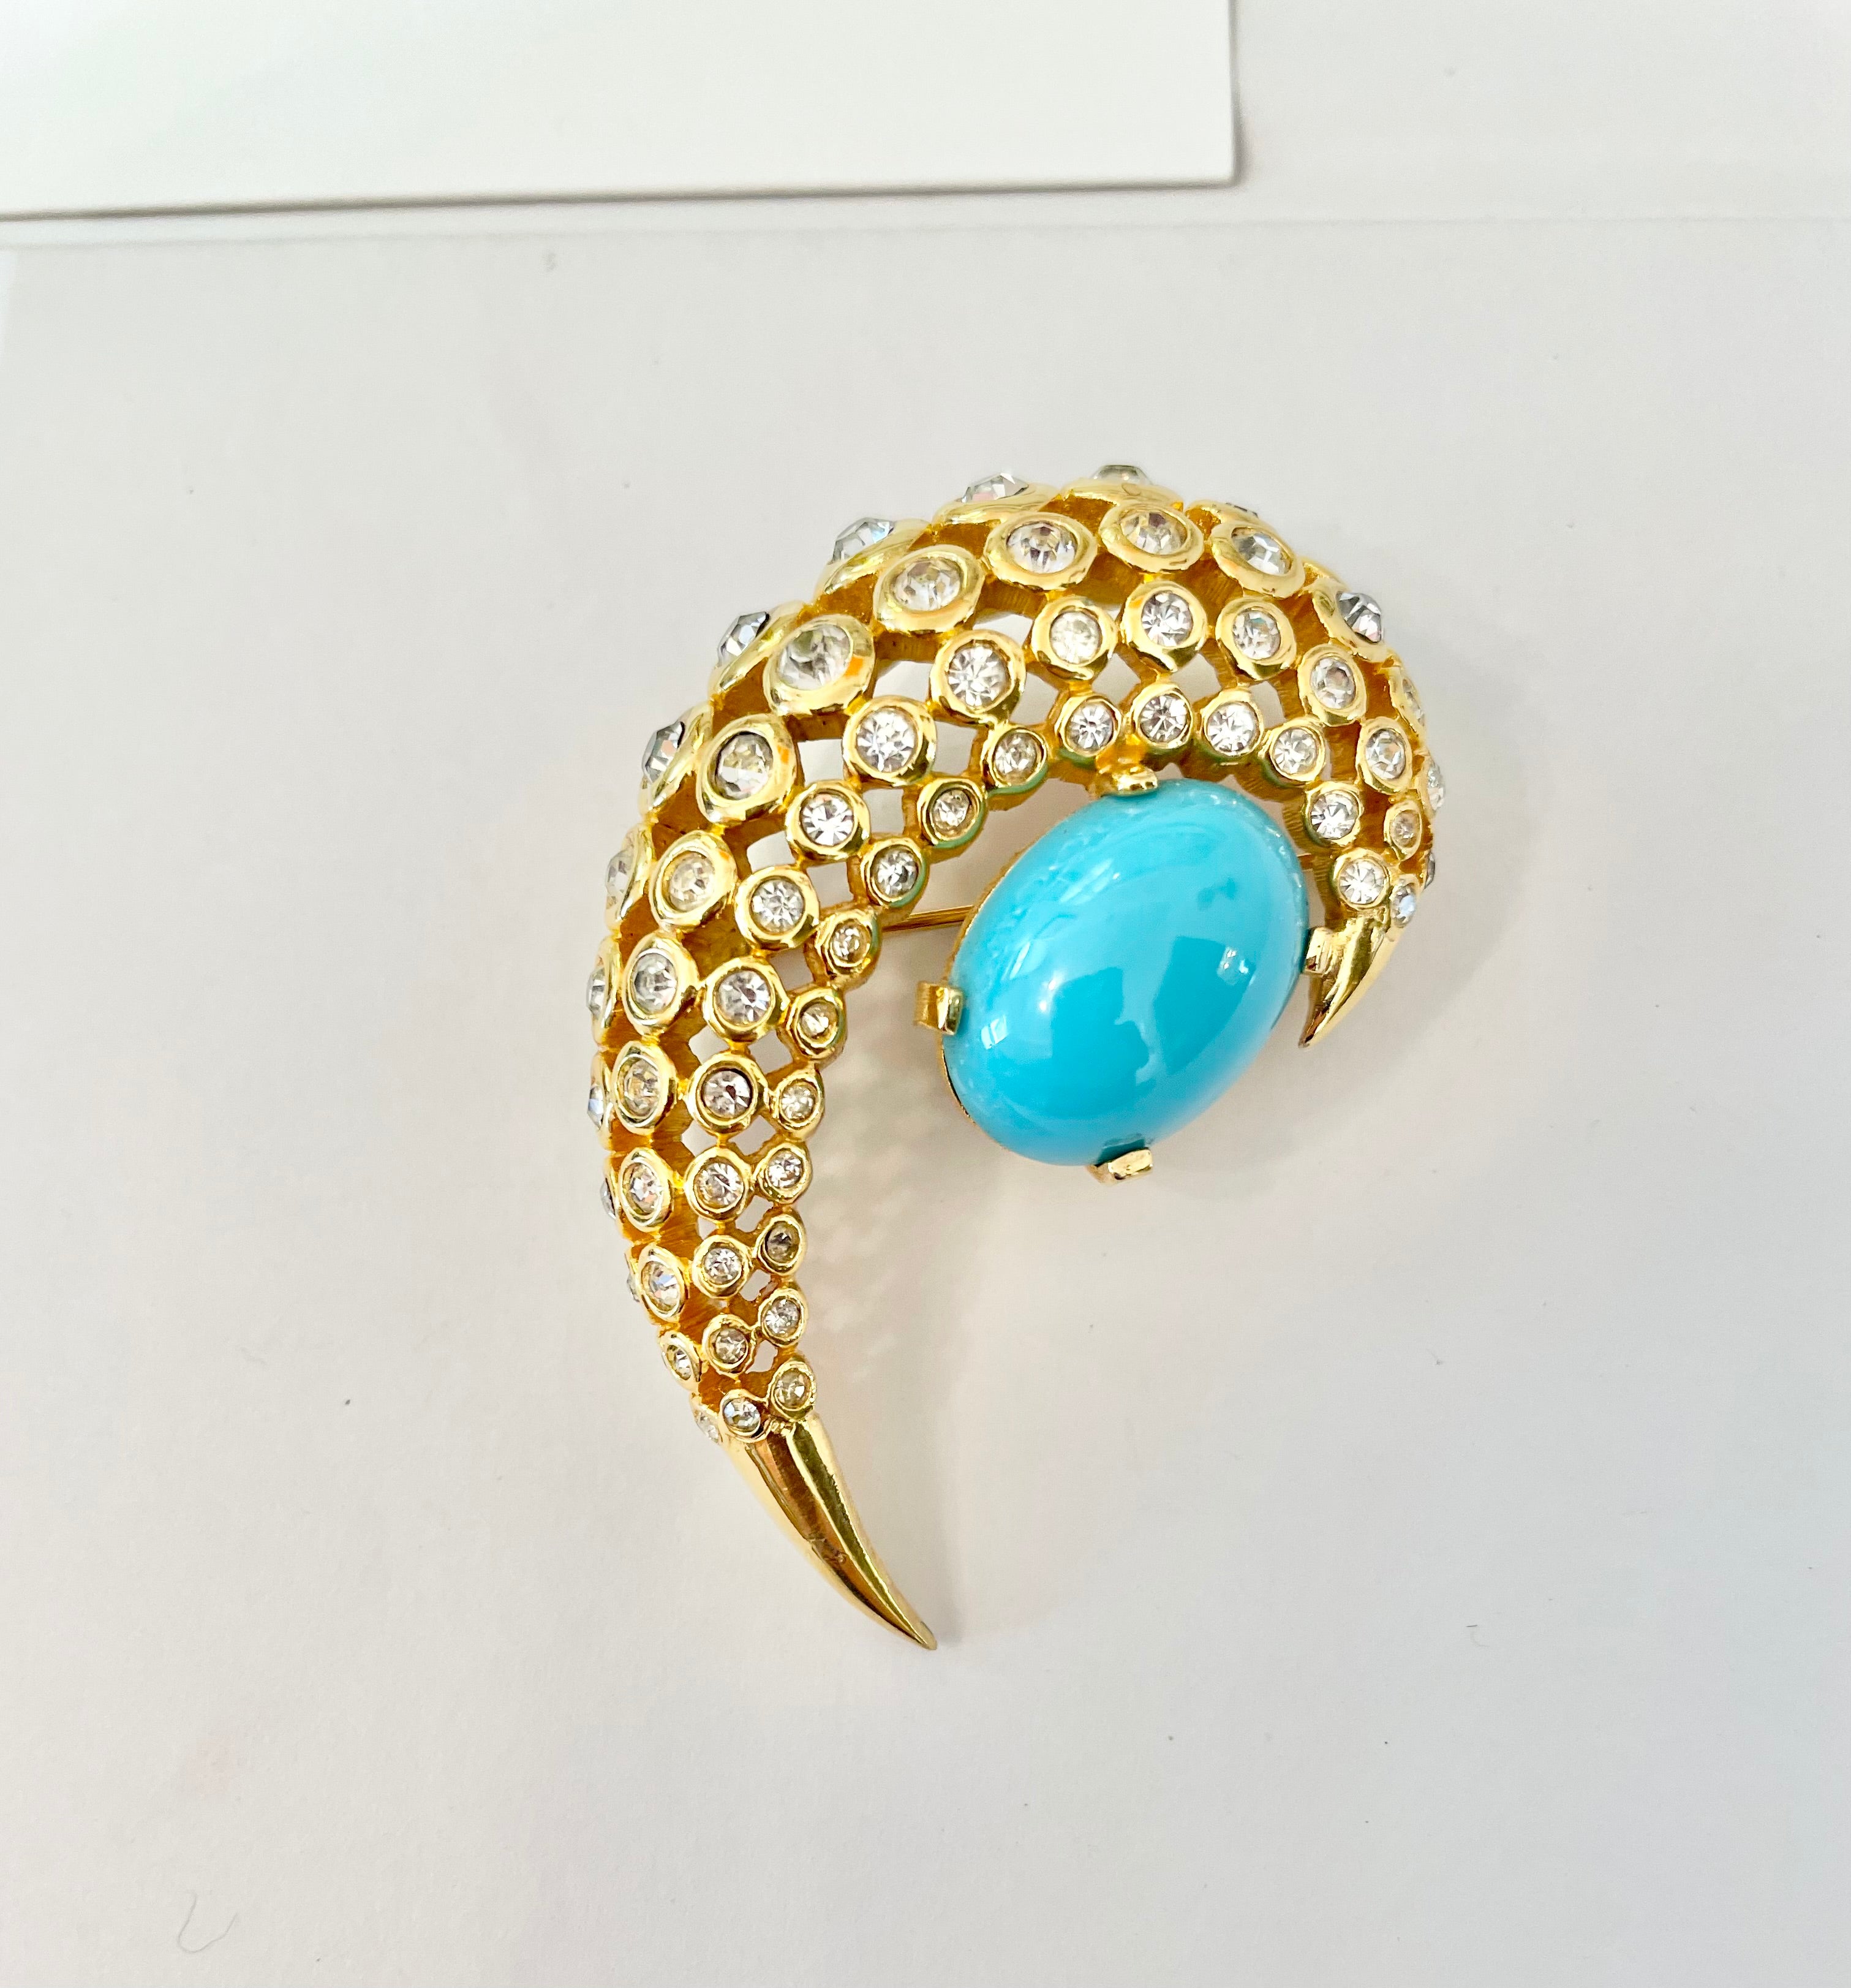 Vintage glamorous faux turquoise paisley brooch... truly divine.